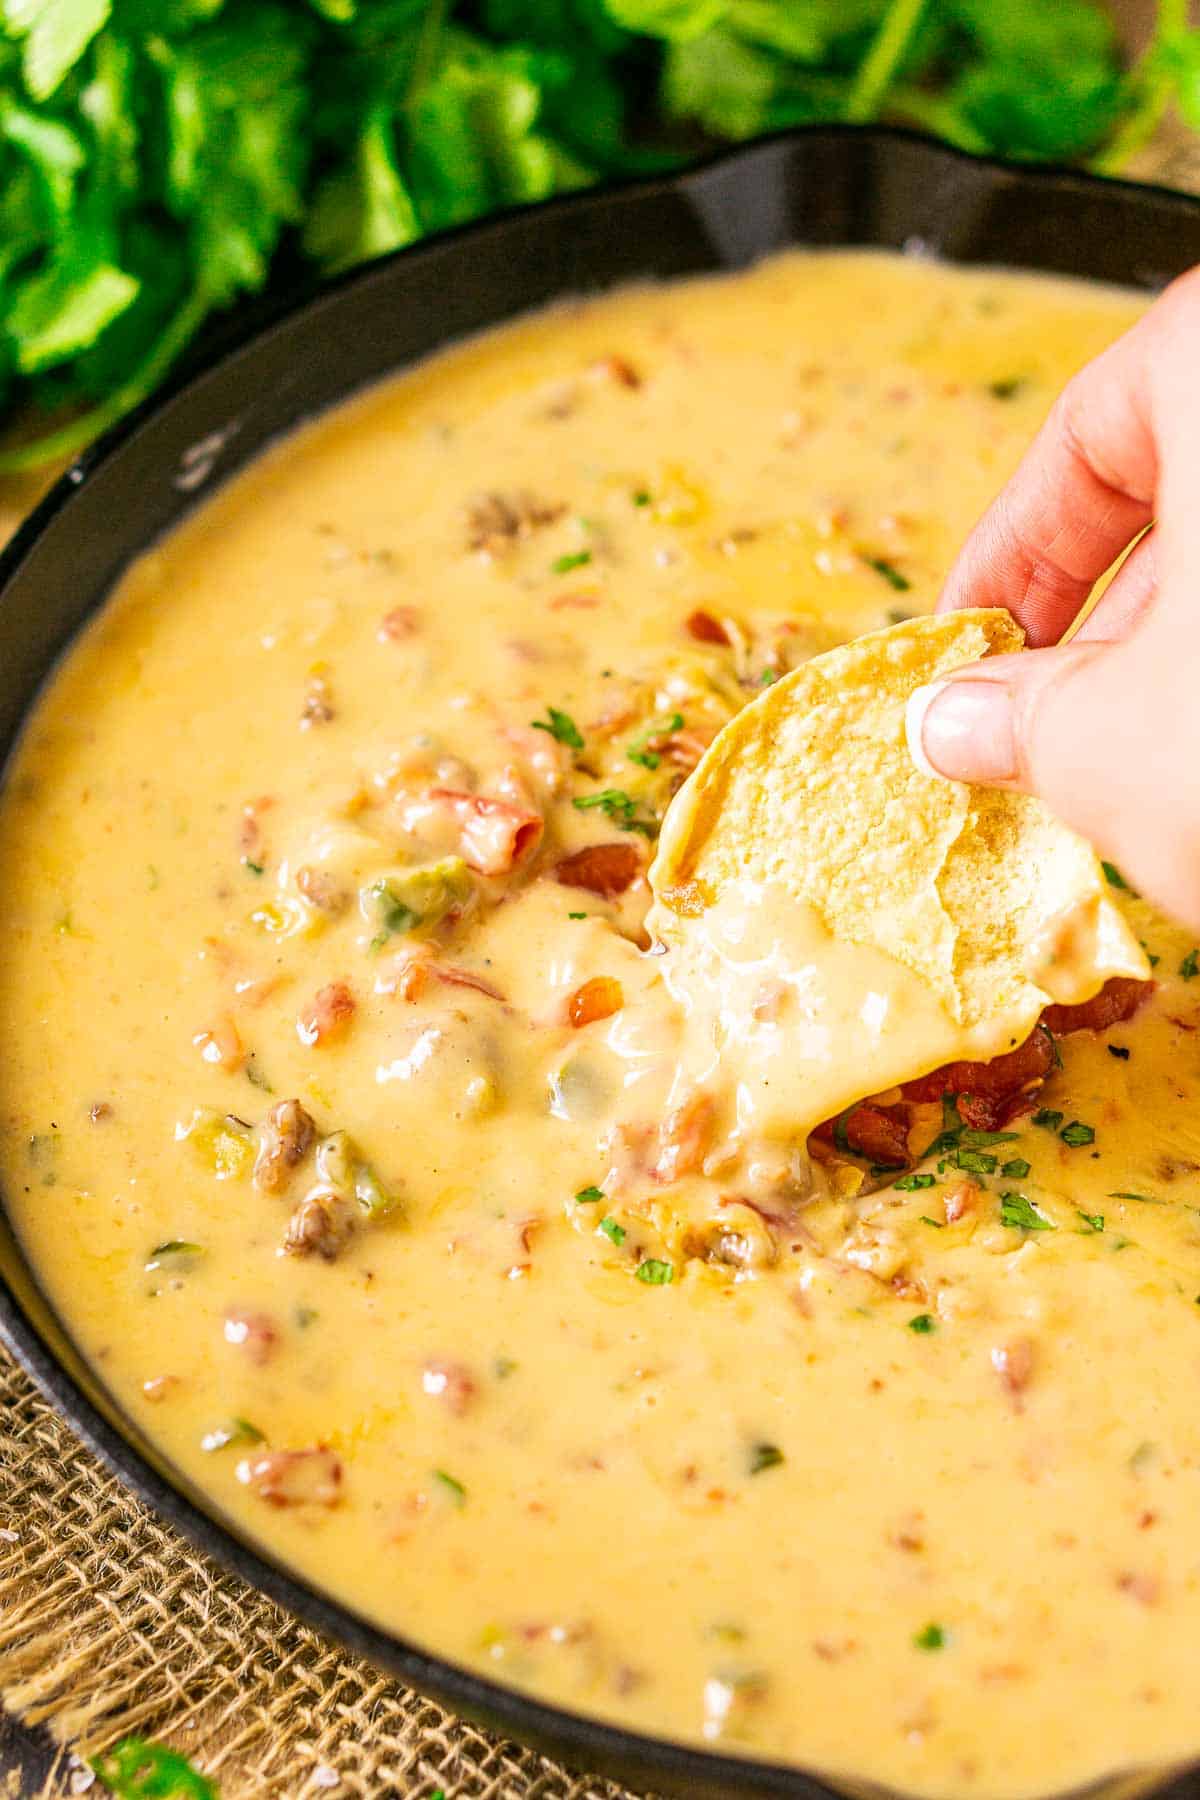 A hand holding a tortilla chip dipping into the queso with chips and cilantro to the side.